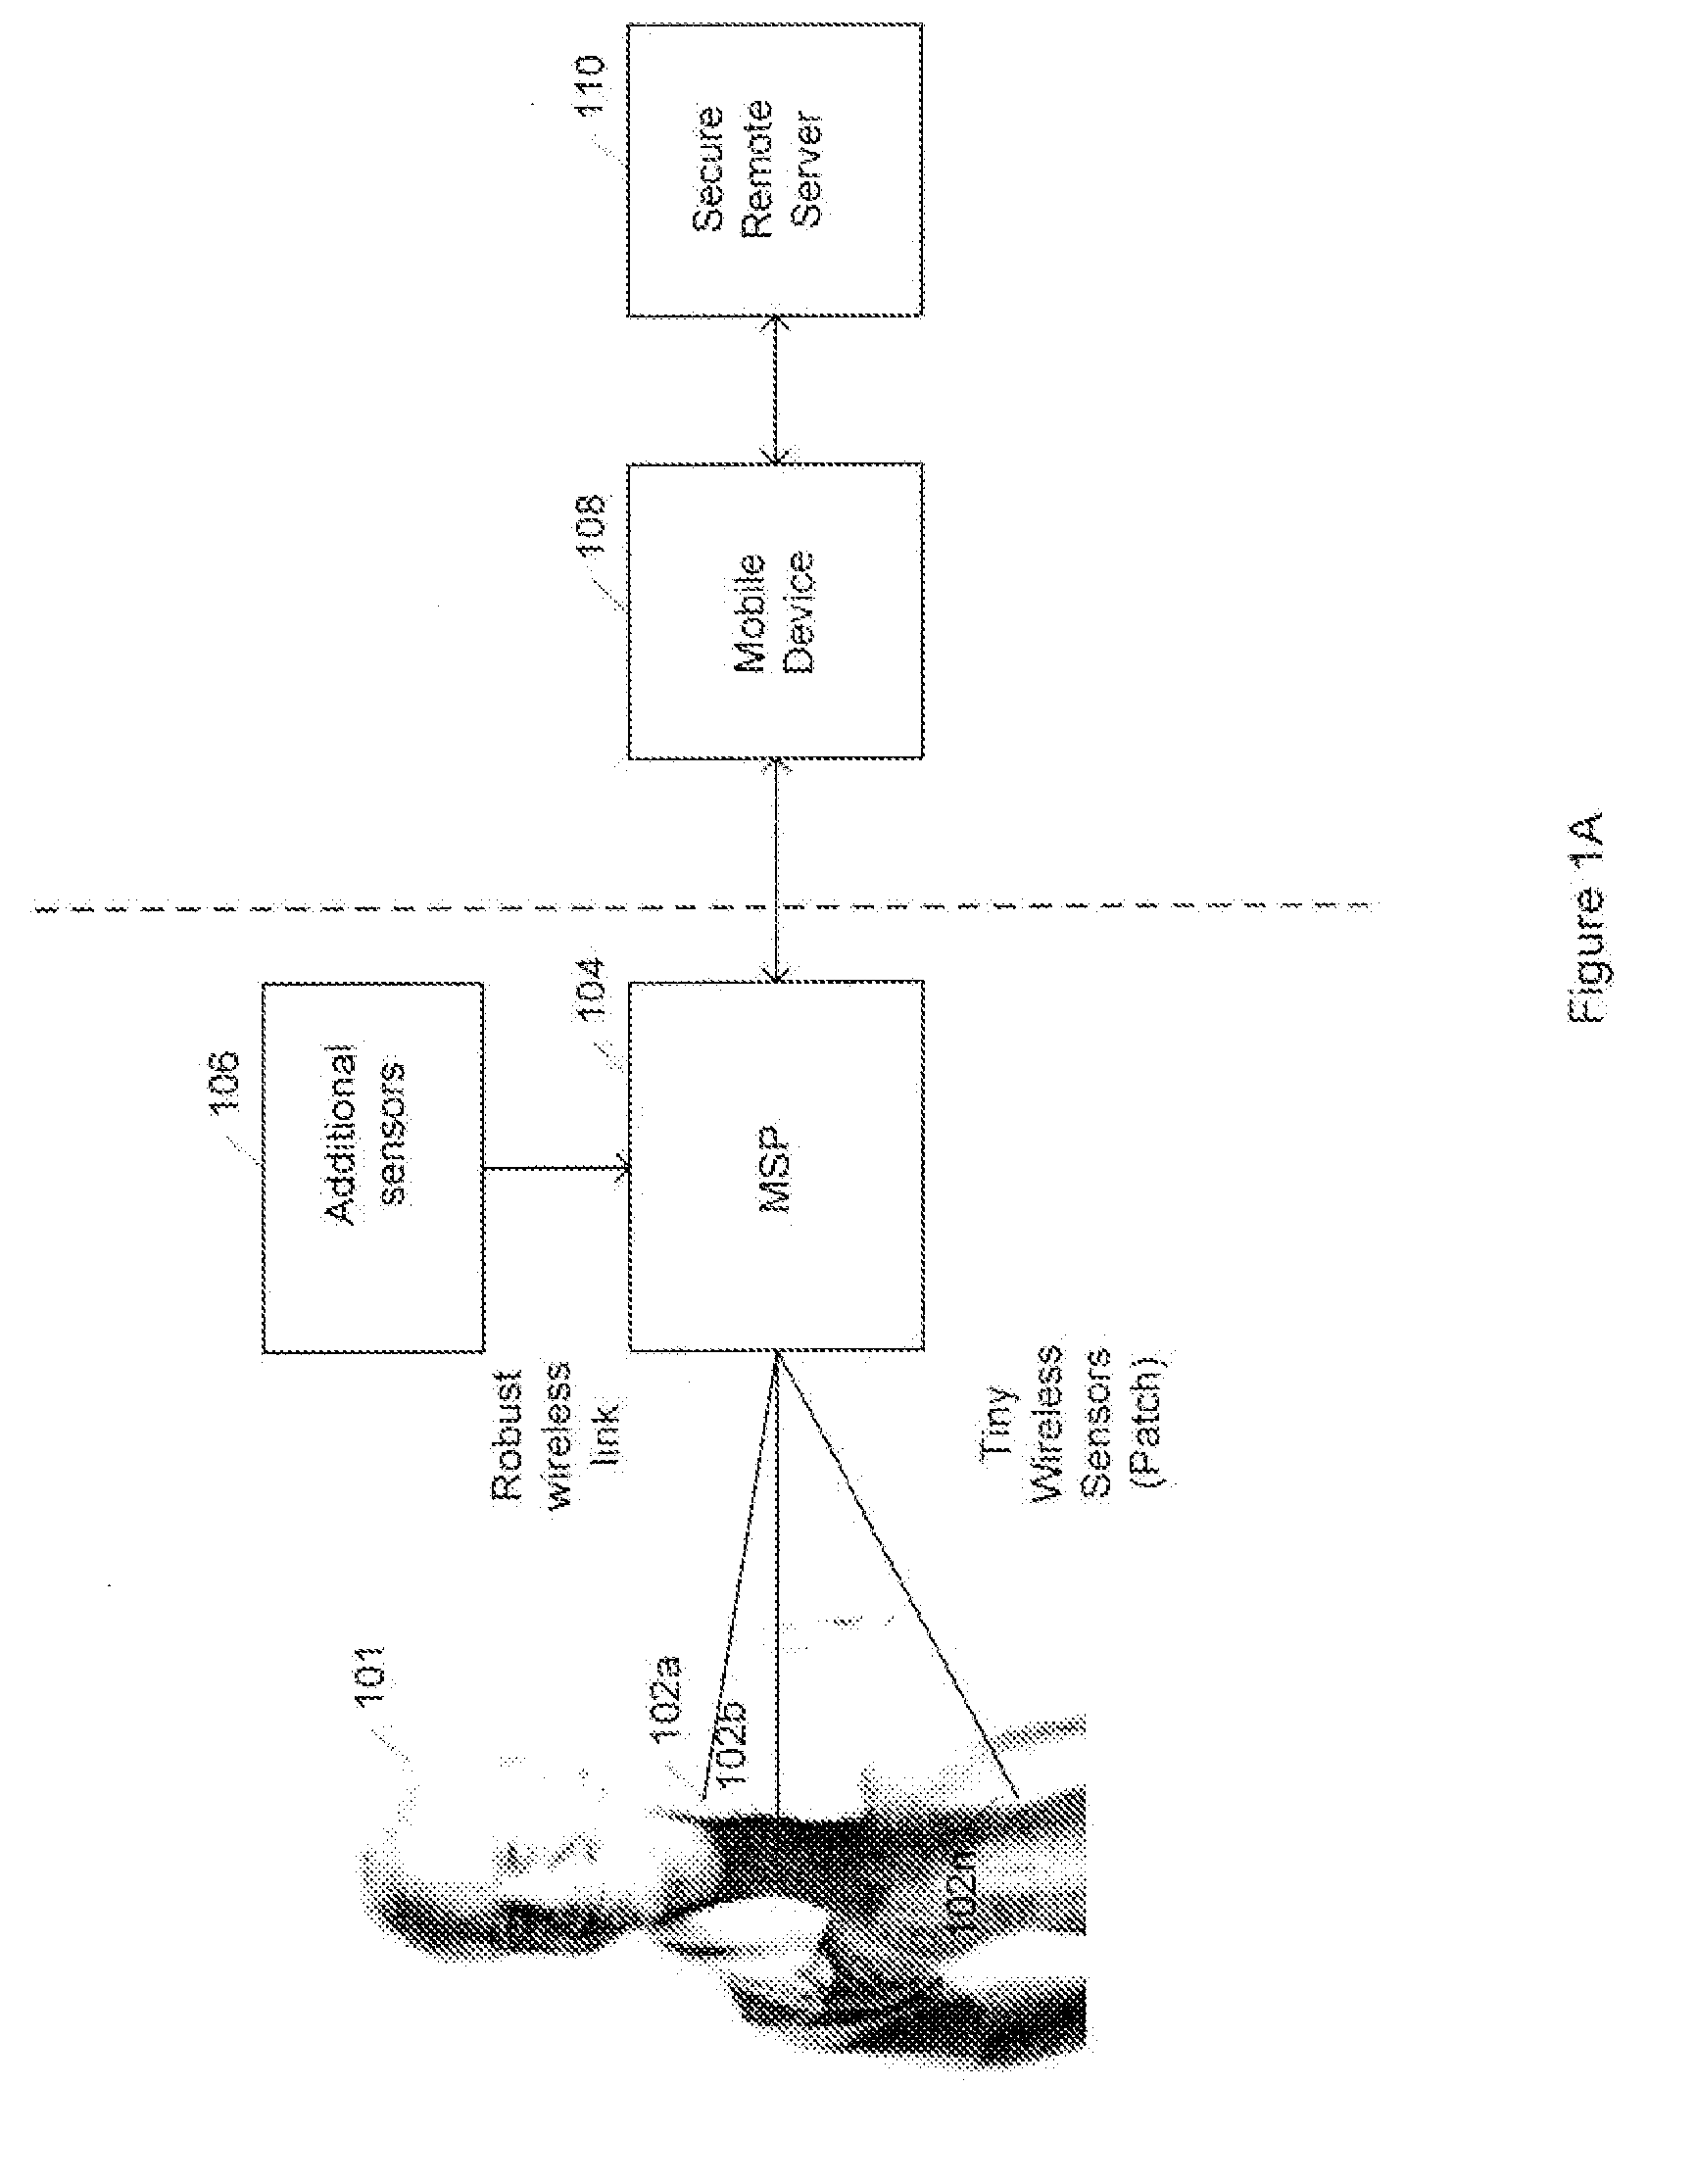 Medical signal processing system with distributed wireless sensors